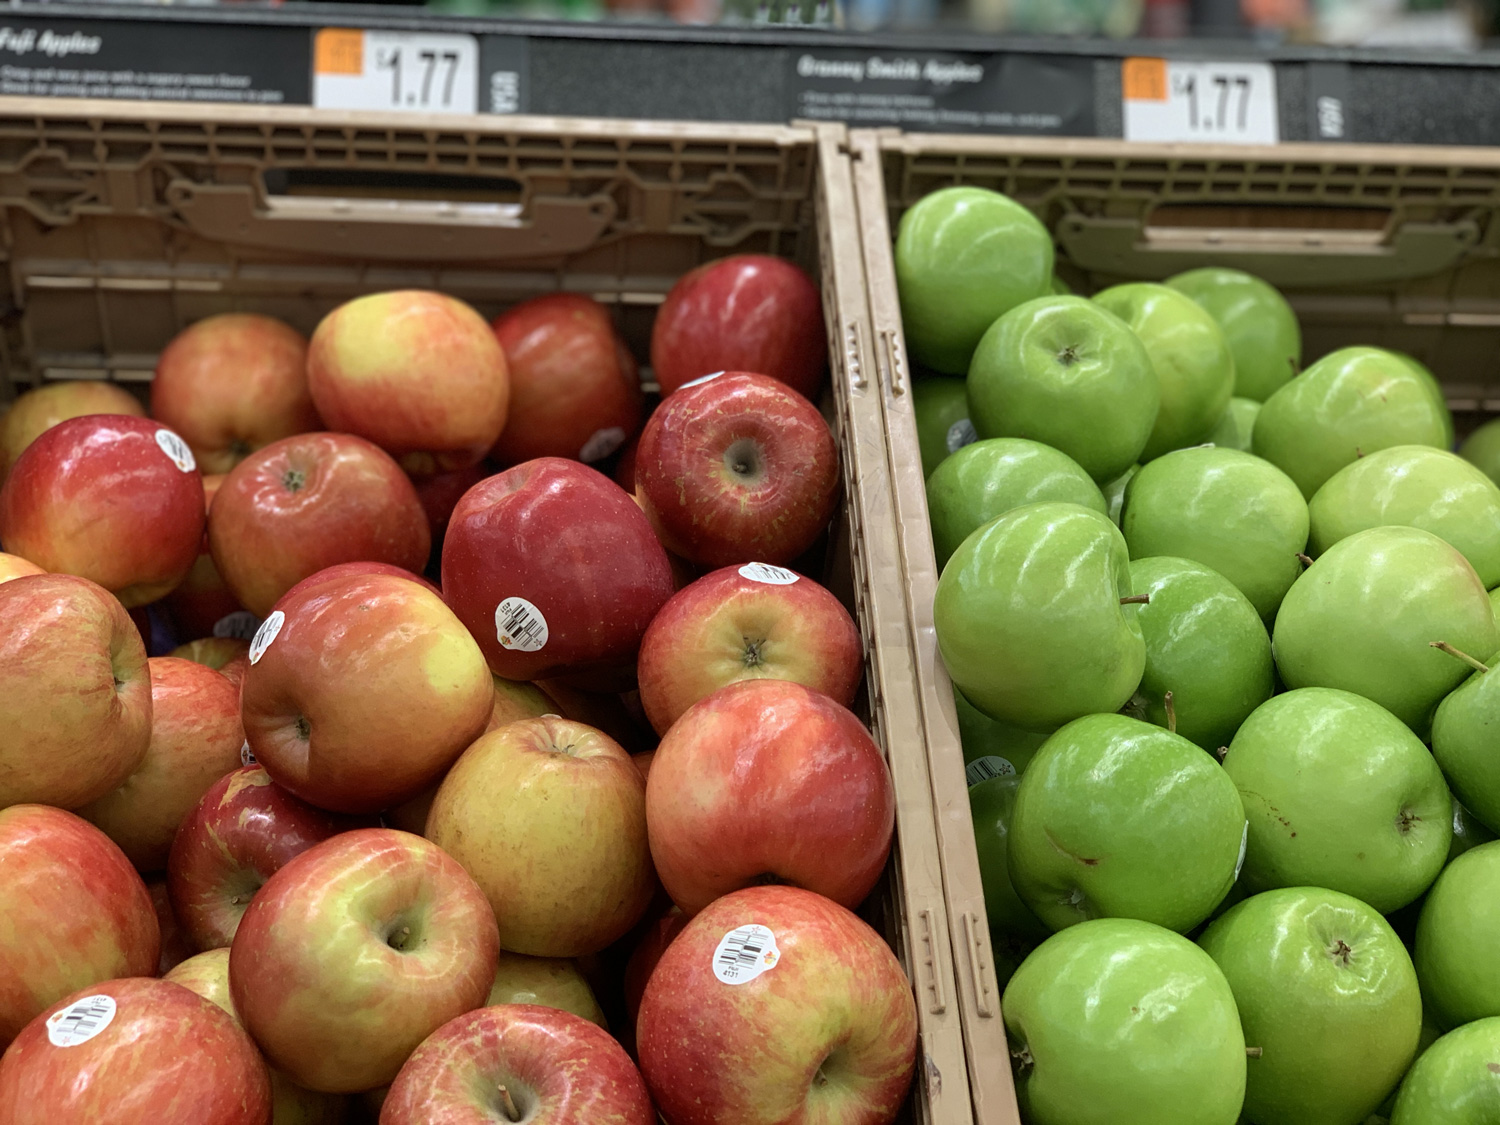 Walmart green and red apples 